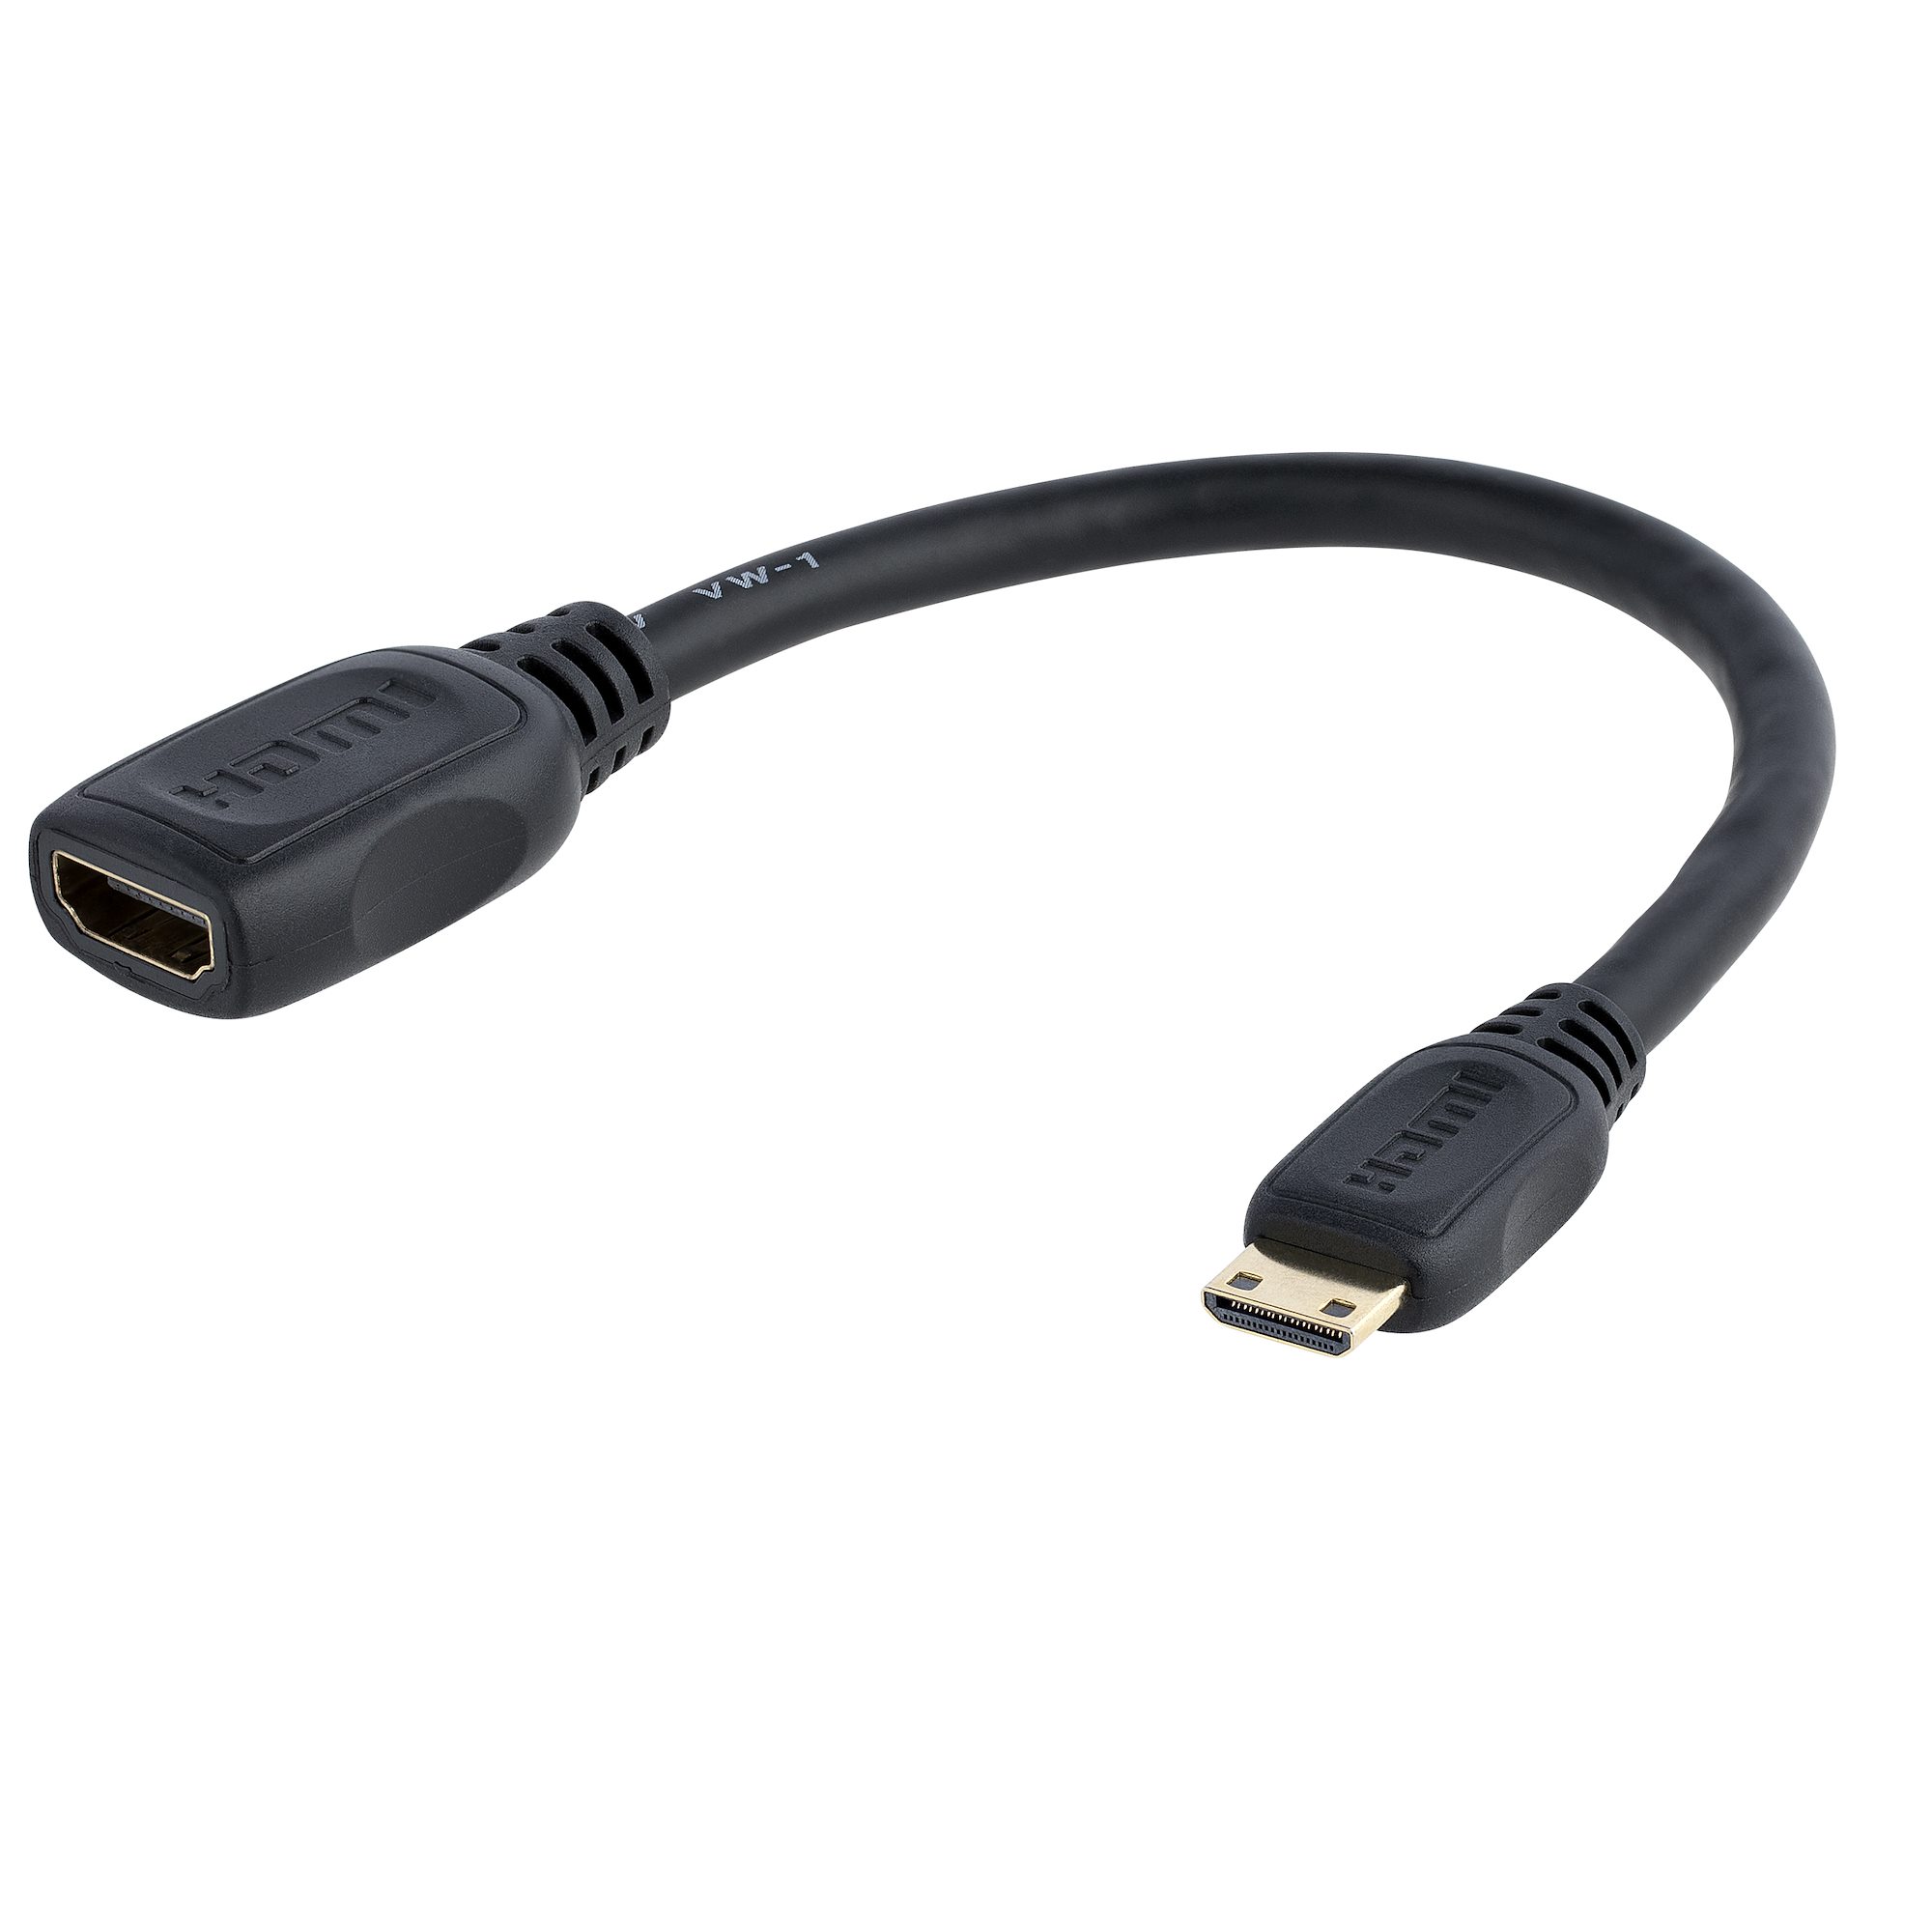 udtale Fremme kontoførende StarTech.com Mini HDMI to HDMI Adapter - HDMI® Cables & HDMI Adapters |  StarTech.com